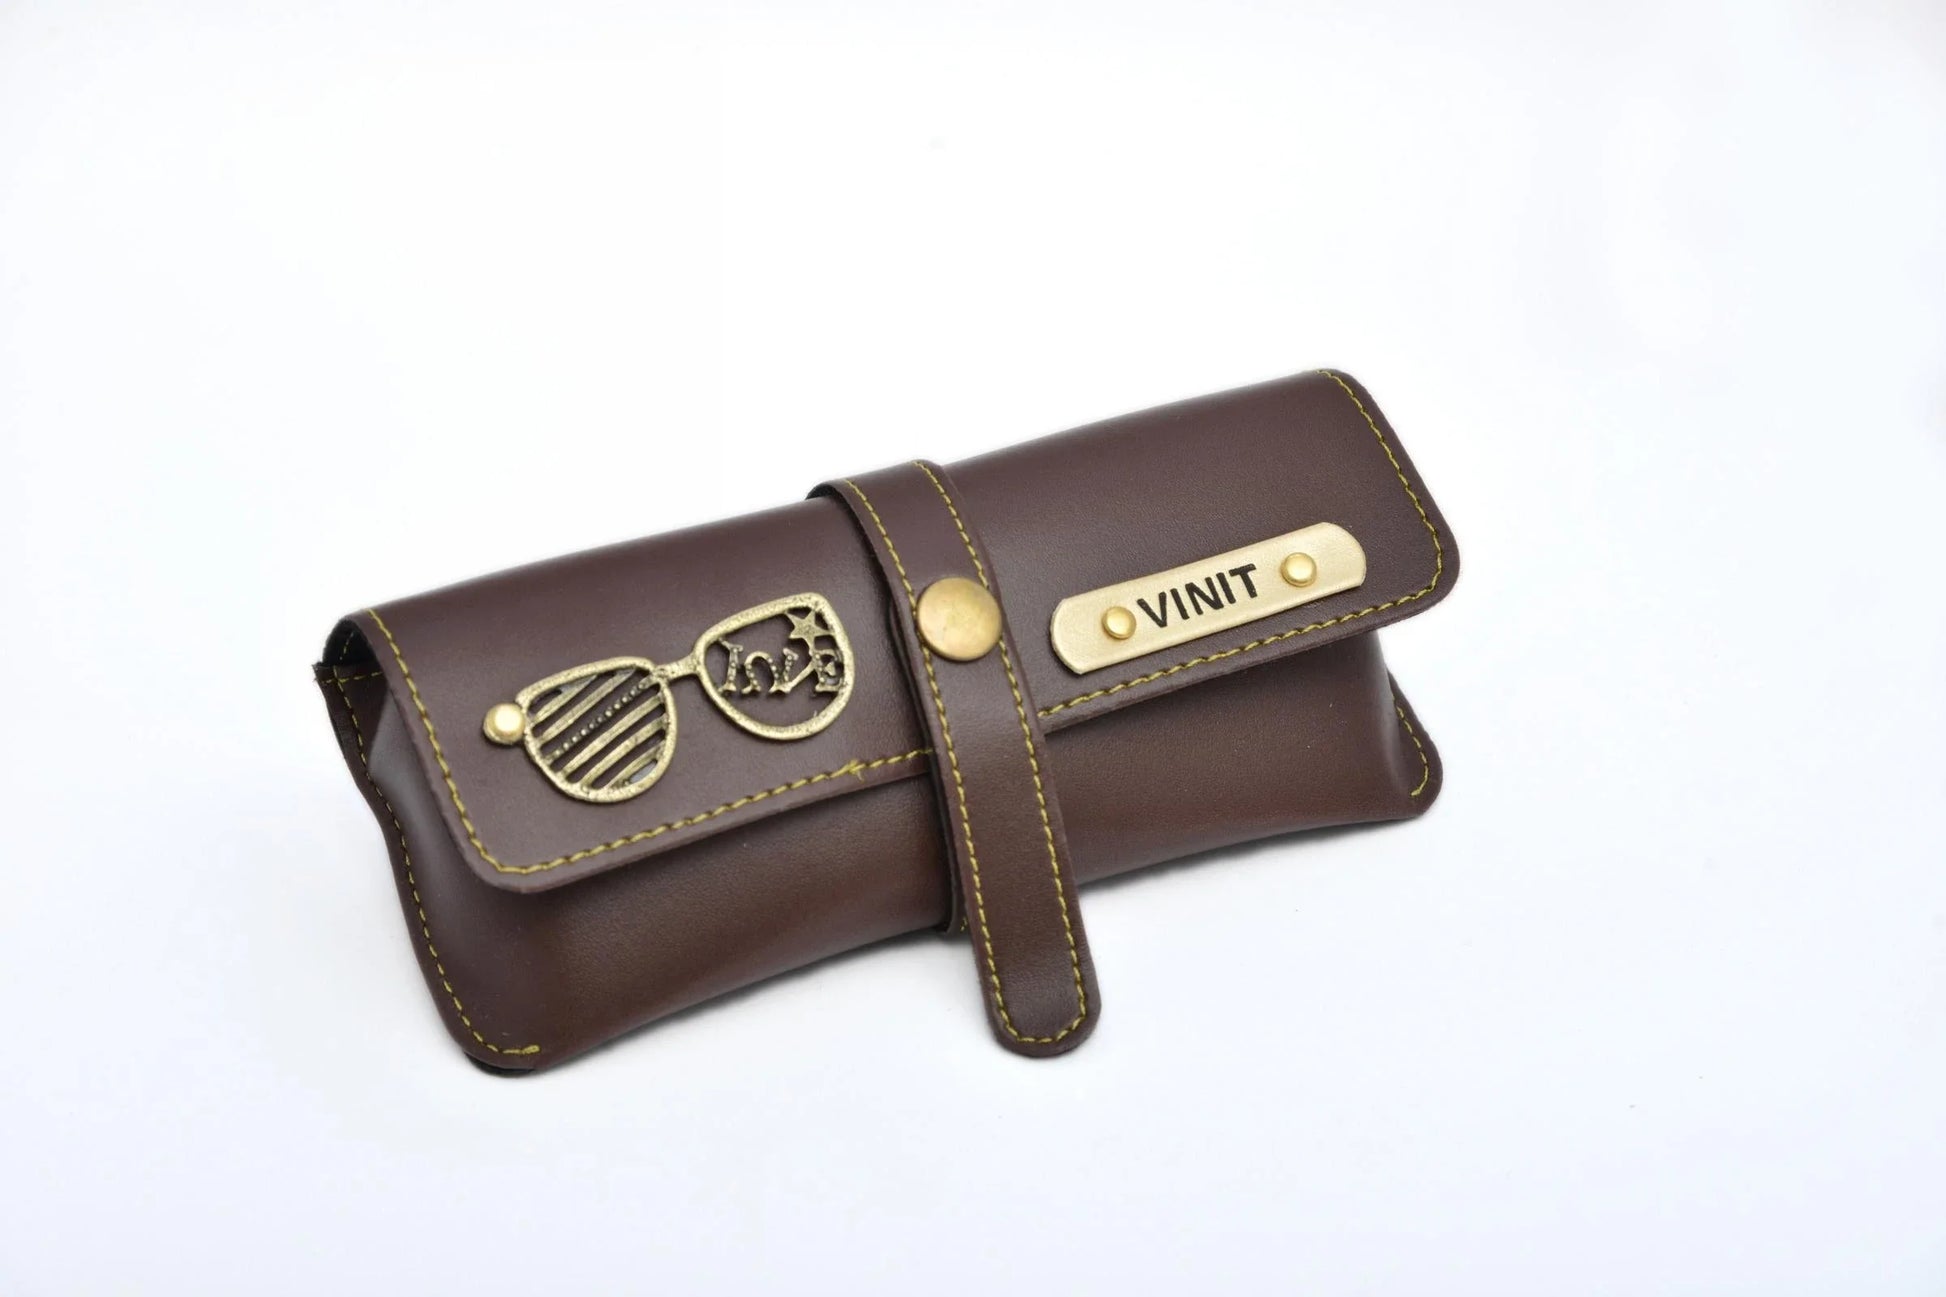 personalized-cb03-brown-customized-best-gift-for-boyfriend-girlfriend.So, protect your eyewear too and make it look modern by getting your very own classy, personalized unisex leather glass case.  Add your name and charm to your favourite coloured eyewear case and live in style!   With a royal leathery finish and a top-notch material quality, these personalized unisex glass cases prove to be sturdy while looking stylish. They protect your eyewear from all sorts of stresses!